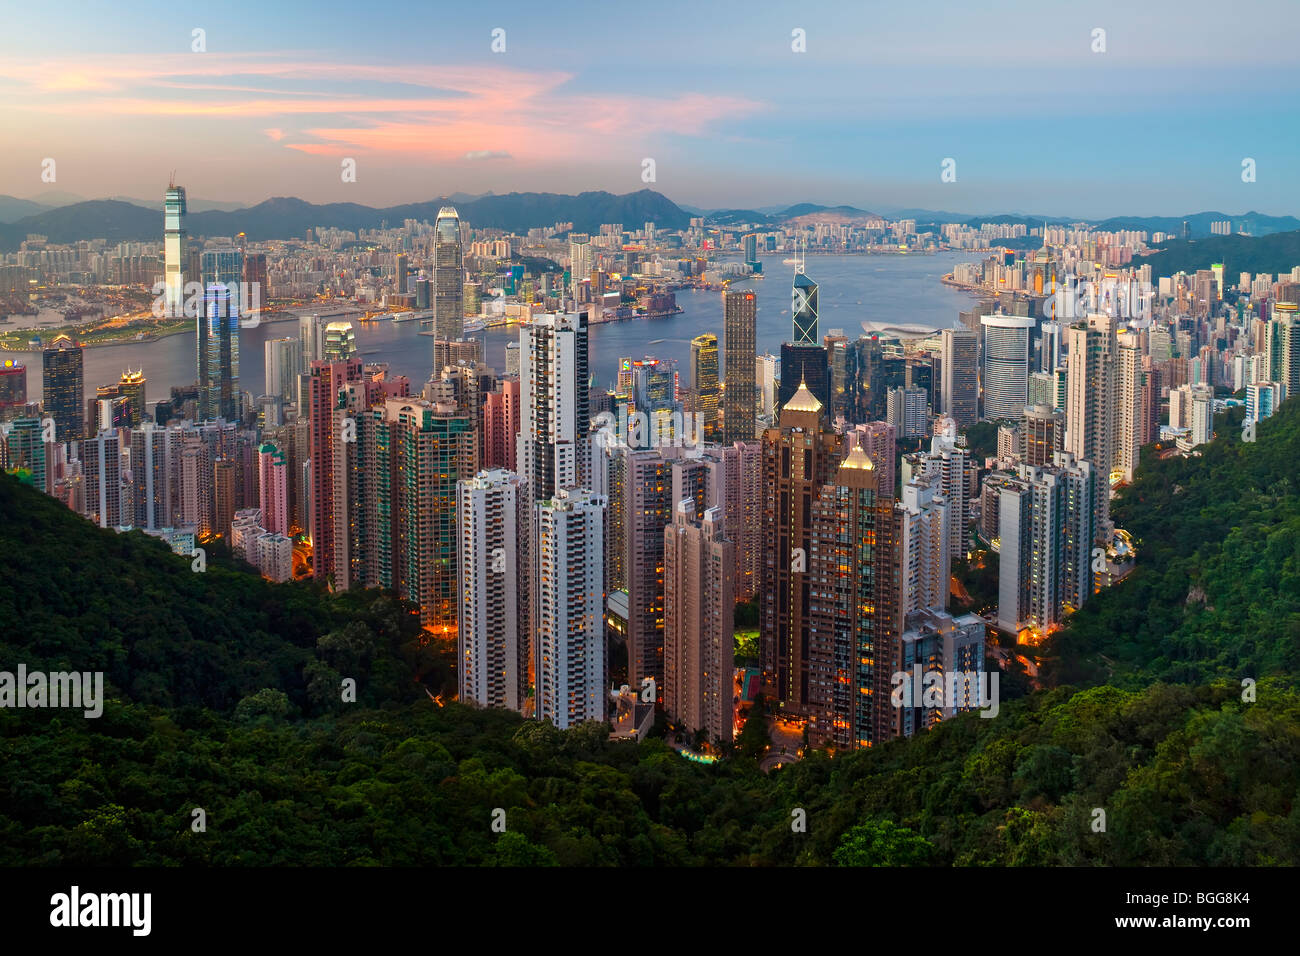 China, Hong Kong, Victoria Peak. View over Hong Kong from Victoria Peak. The illuminated skyline of Central sits below The Peak Stock Photo